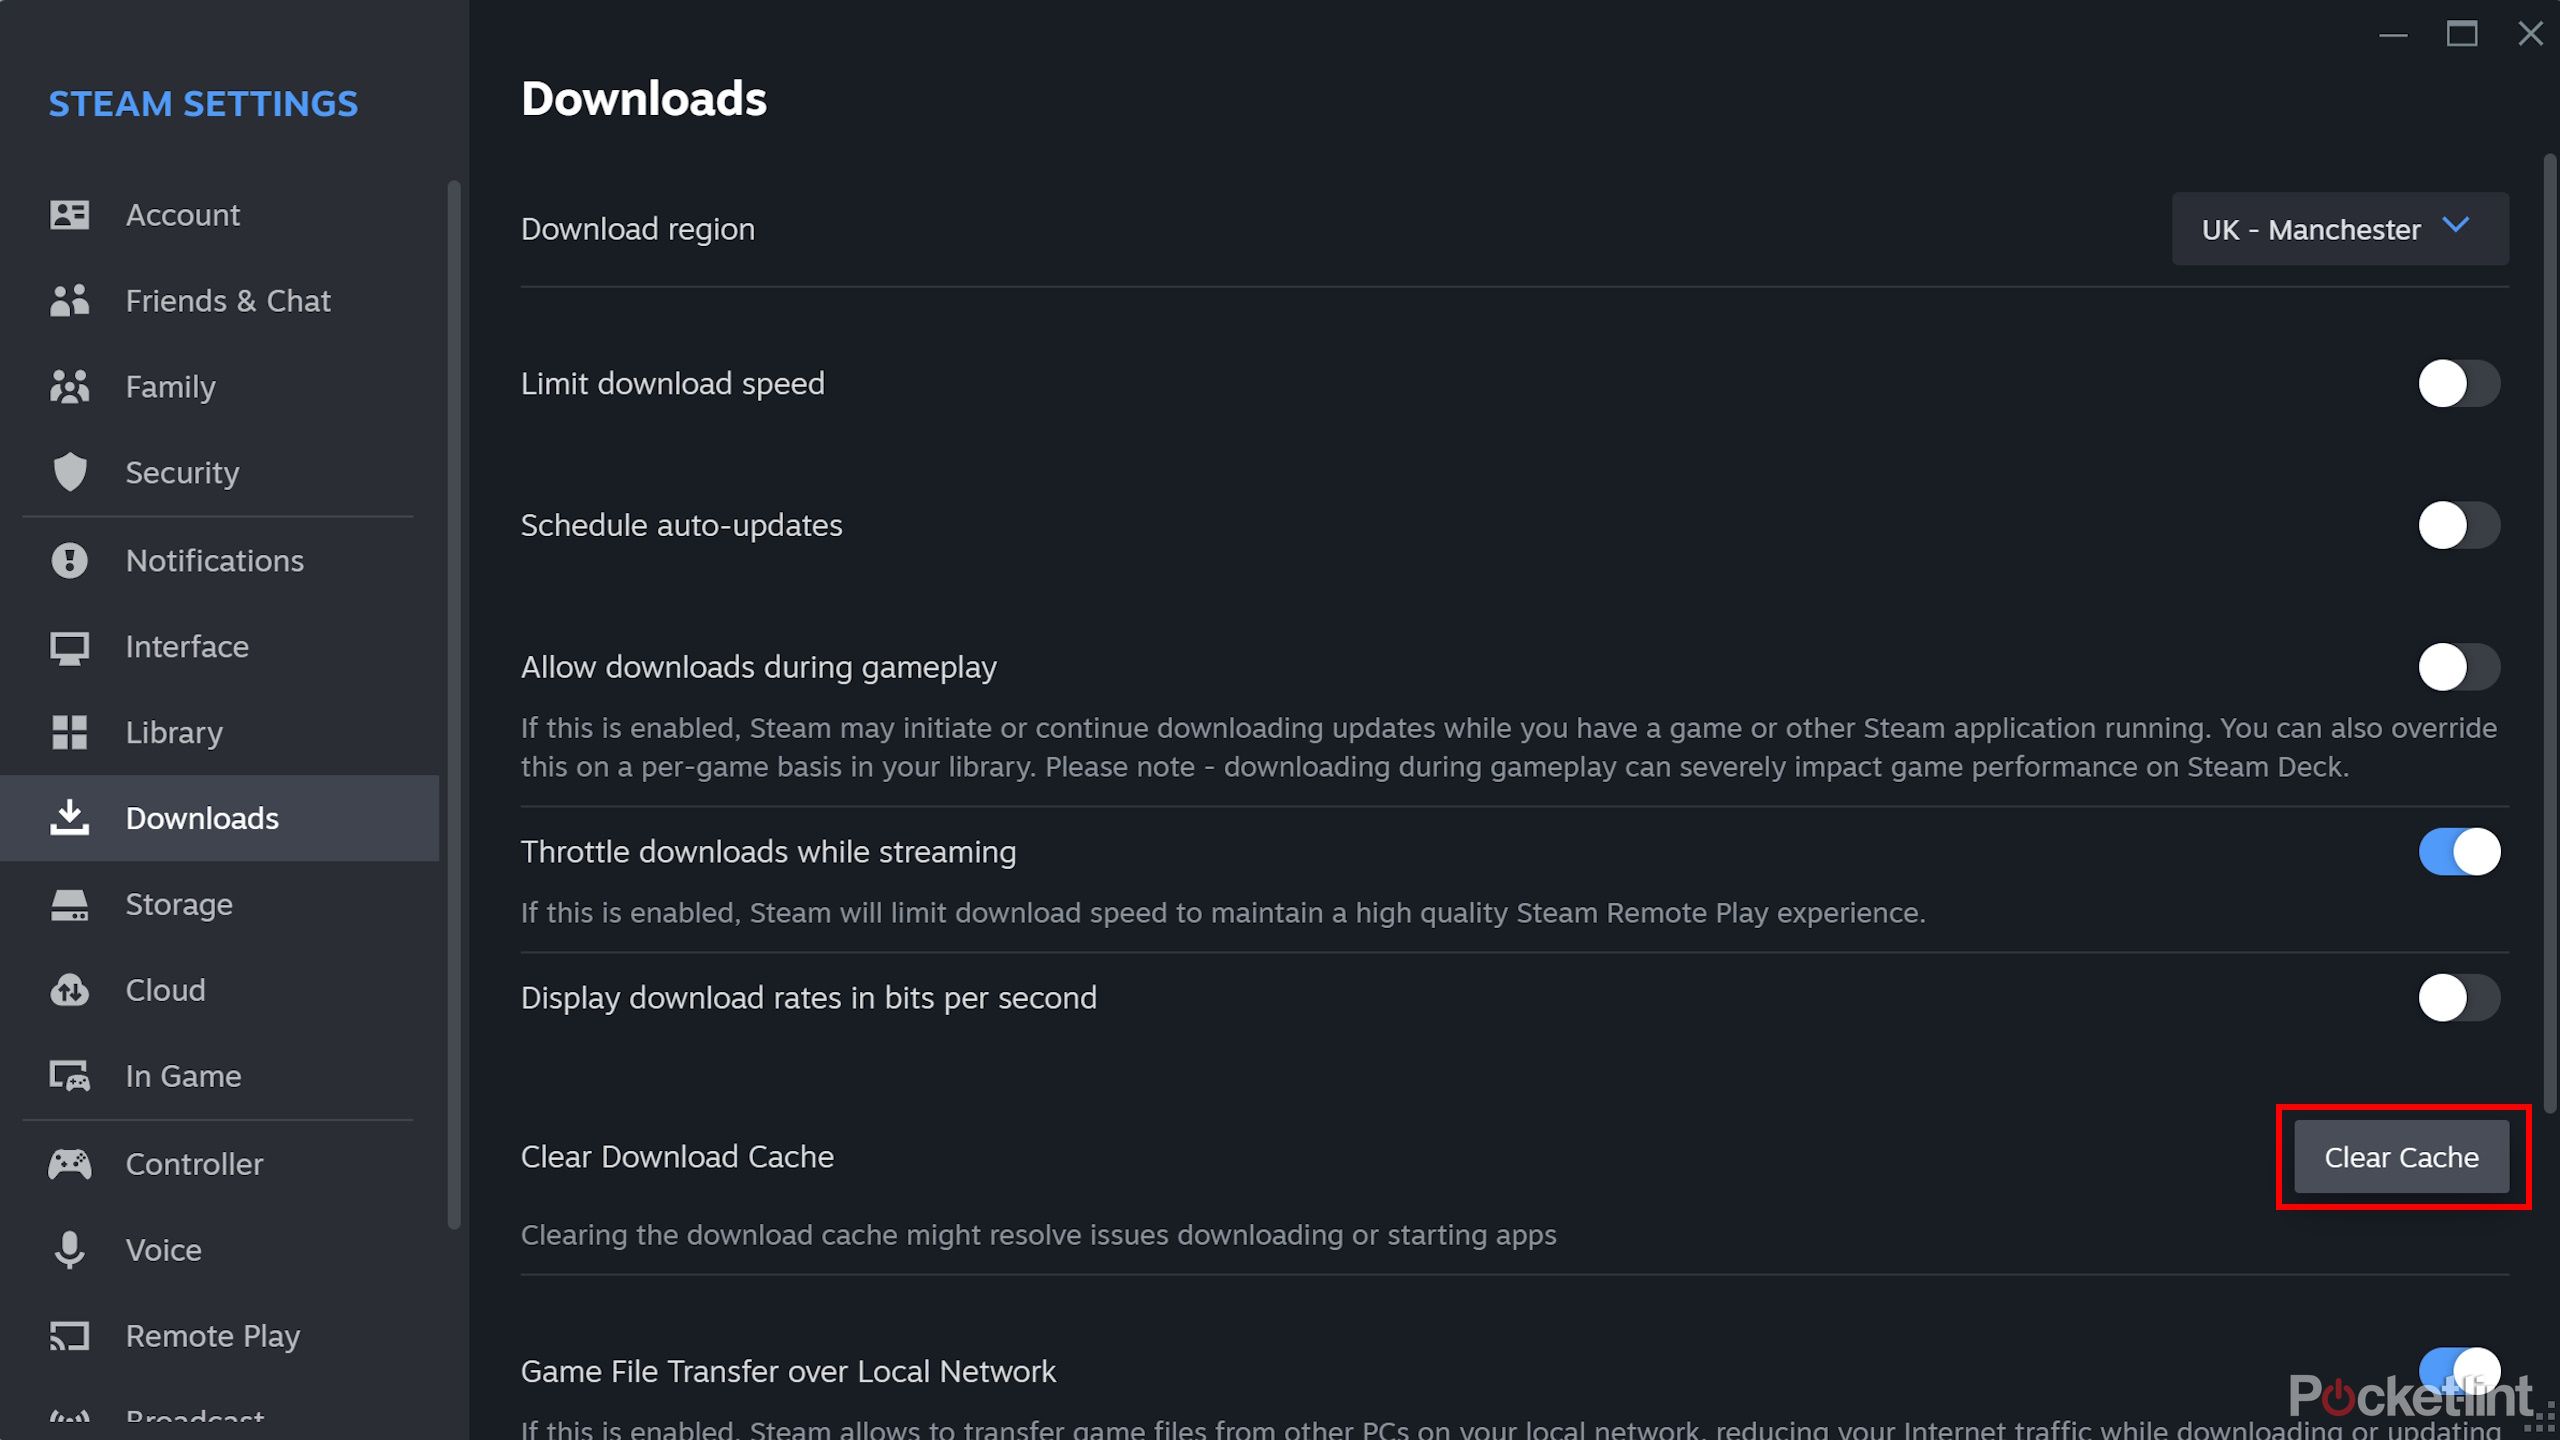 Steam client download settings page highlighting clear cache button